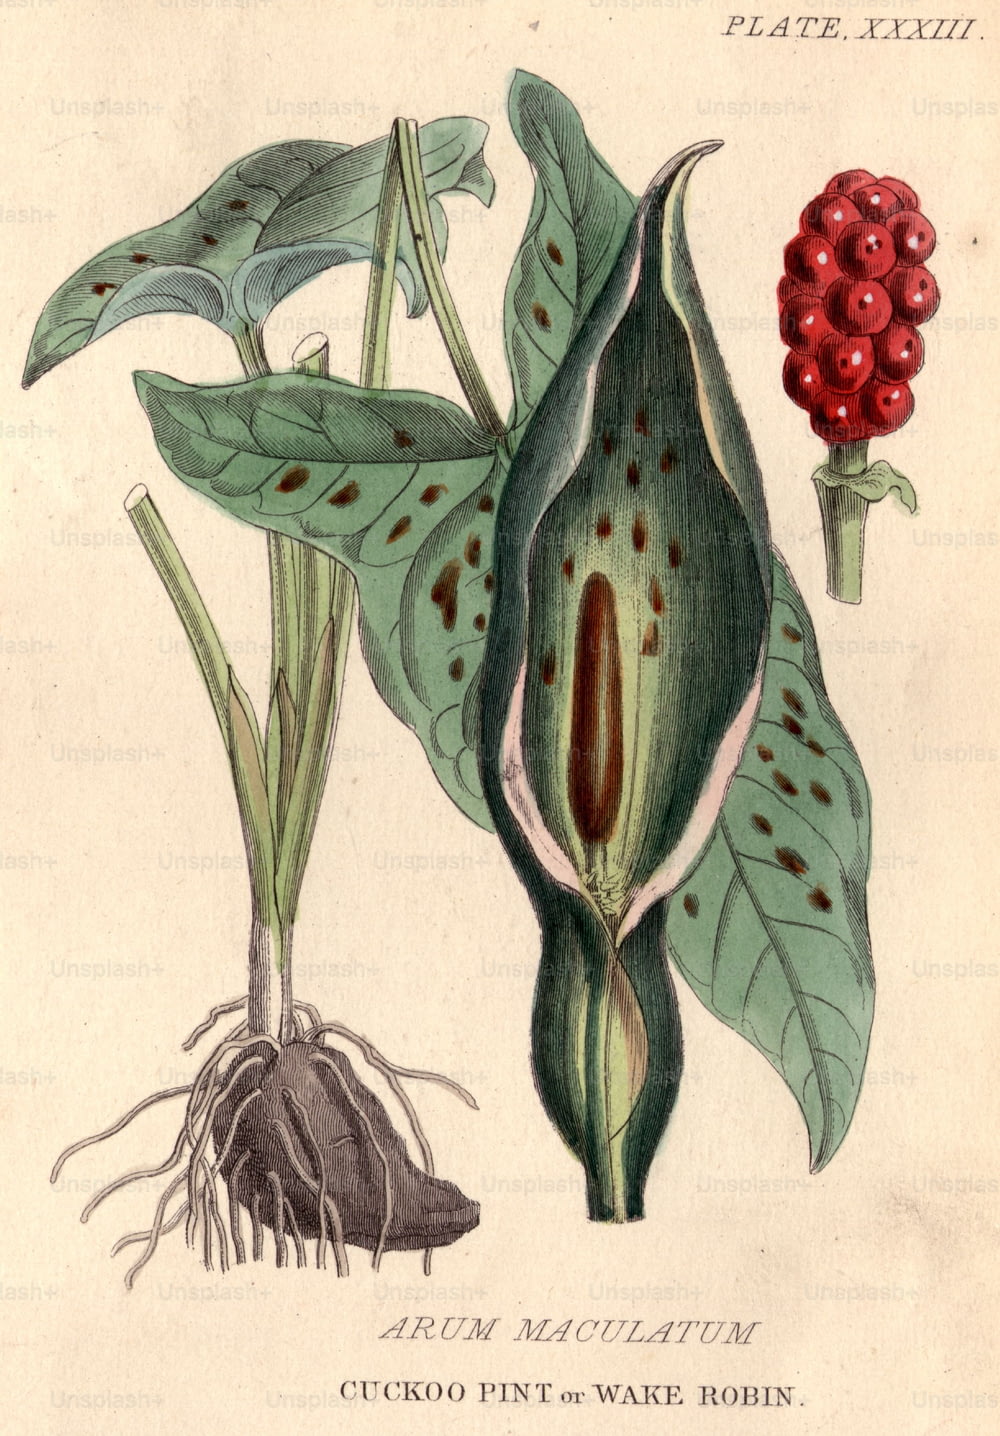 circa 1800:  Arum maculatum, cuckoo pint, or wake robin, with its distinctive and highly poisonous red berries.  (Photo by Hulton Archive/Getty Images)